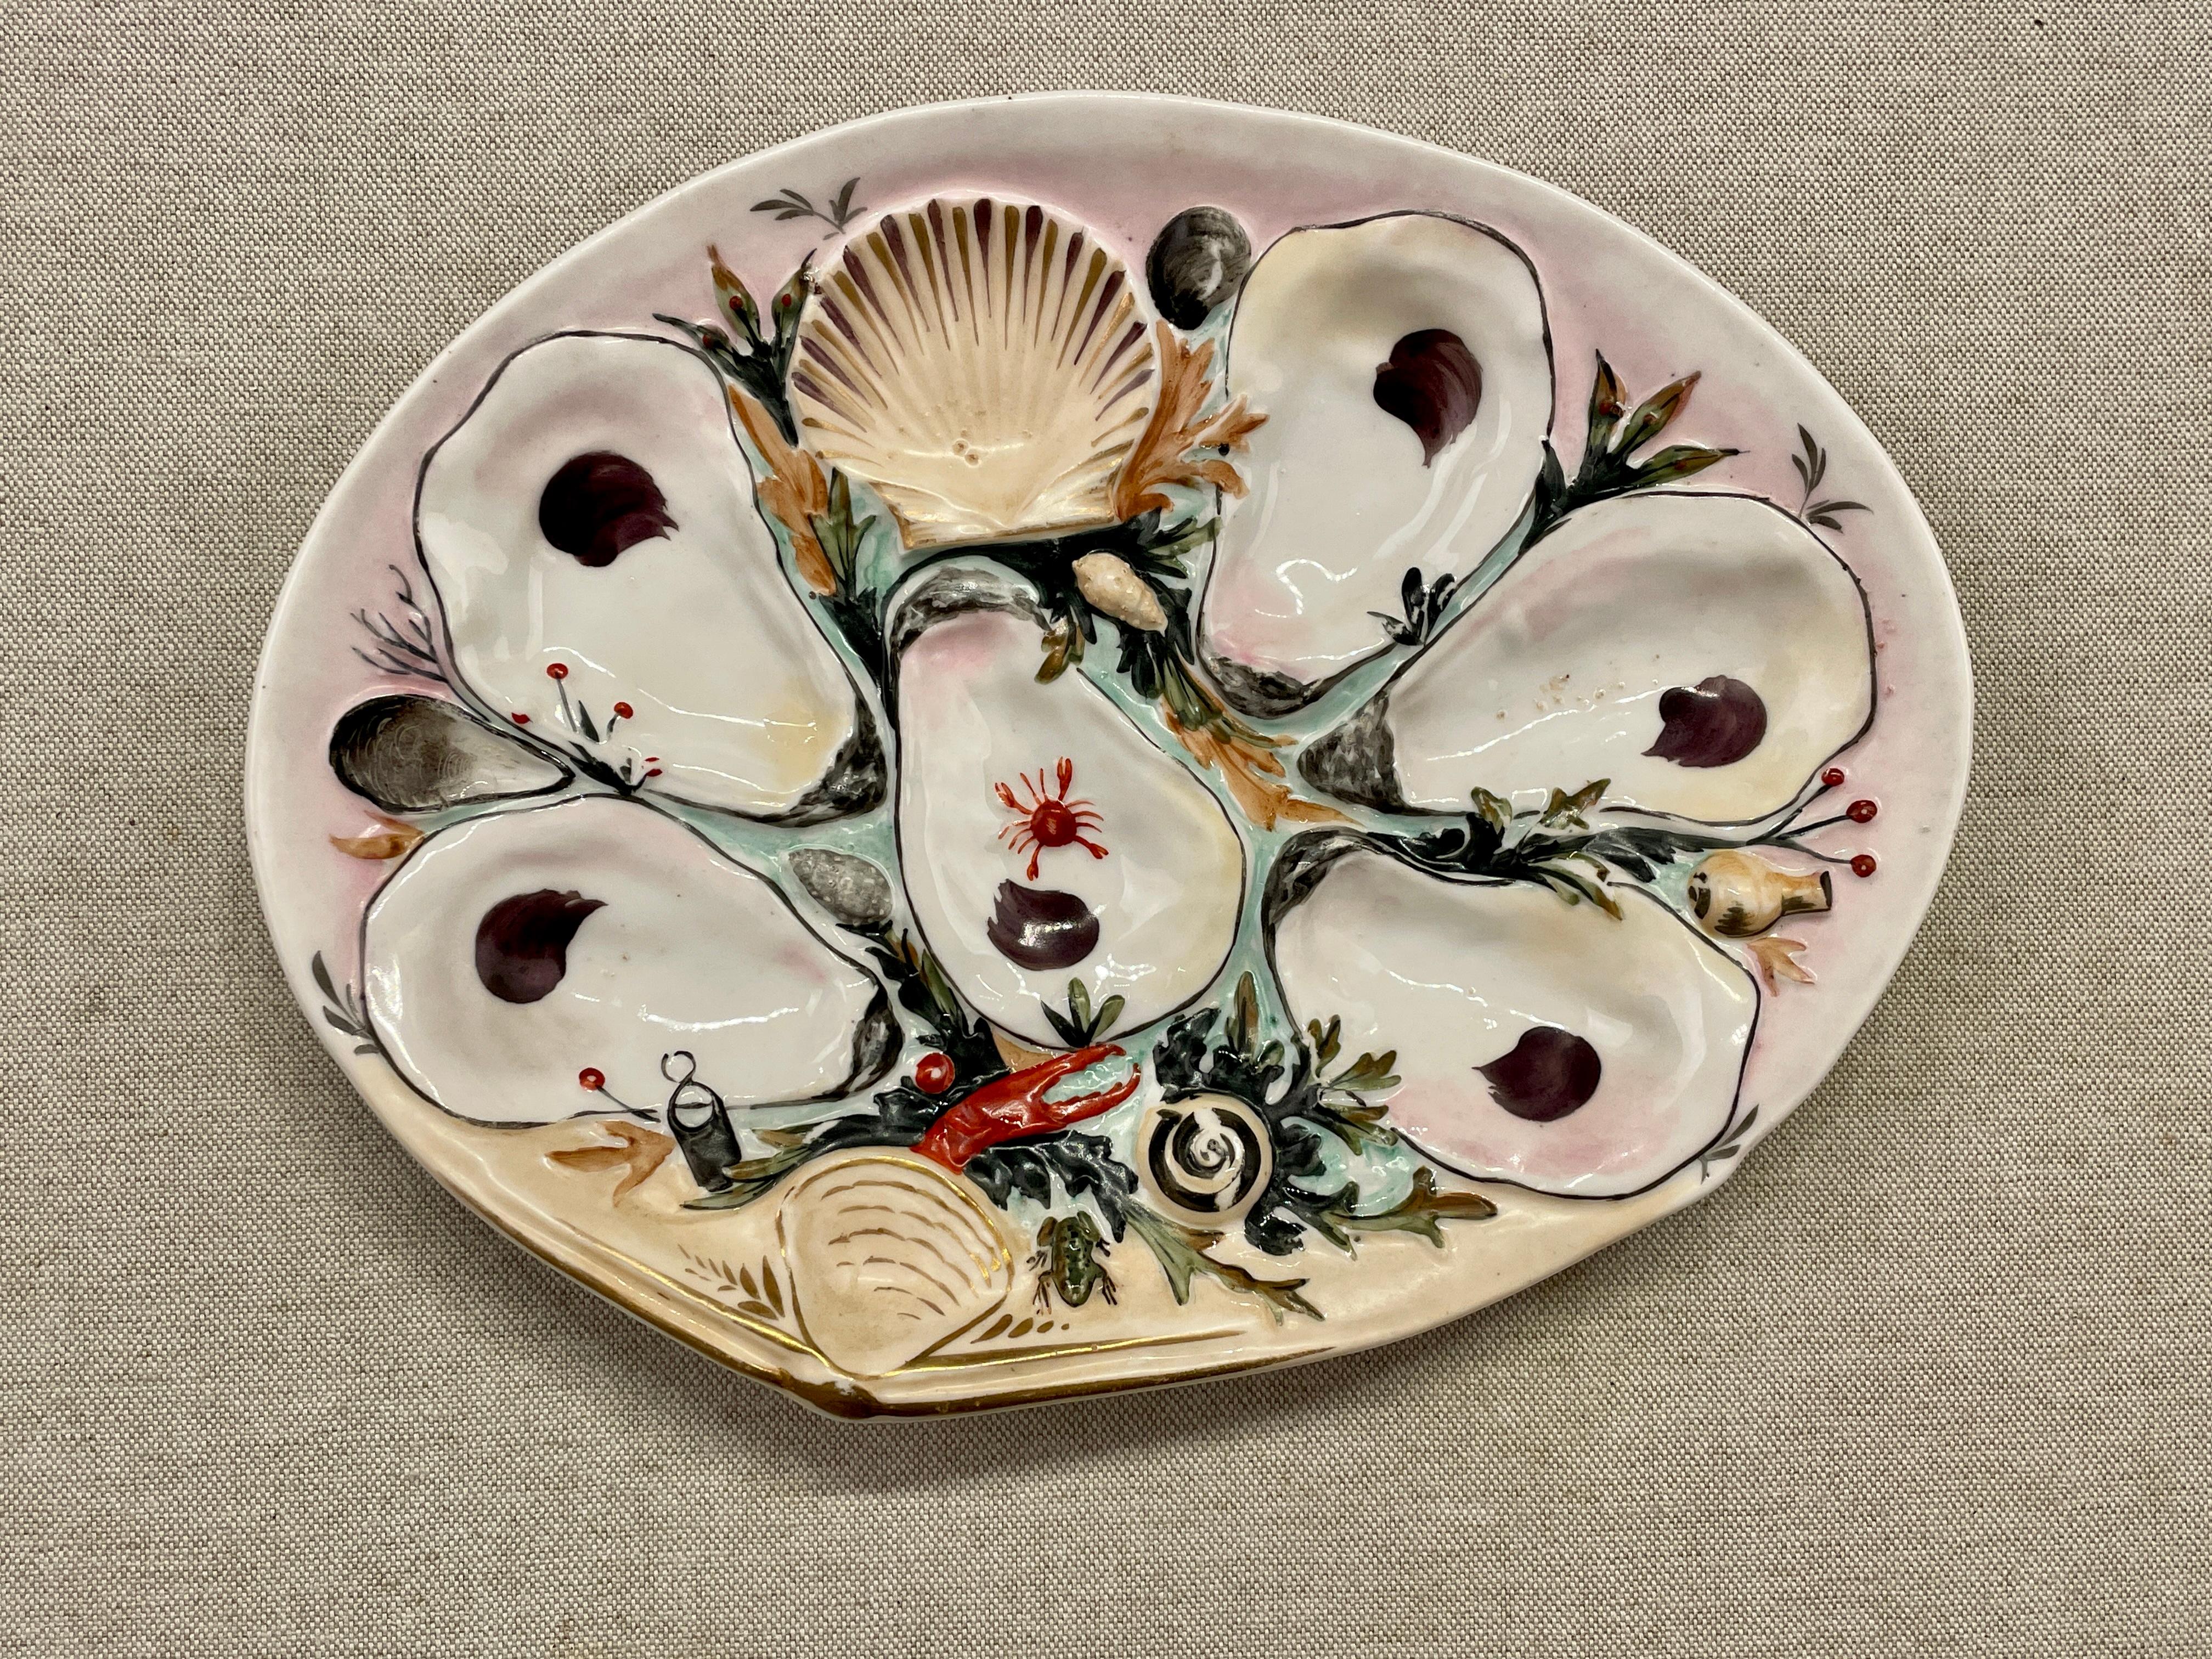 Hand-Painted 19th c. Porcelain Oyster Plate from Union, NY For Sale